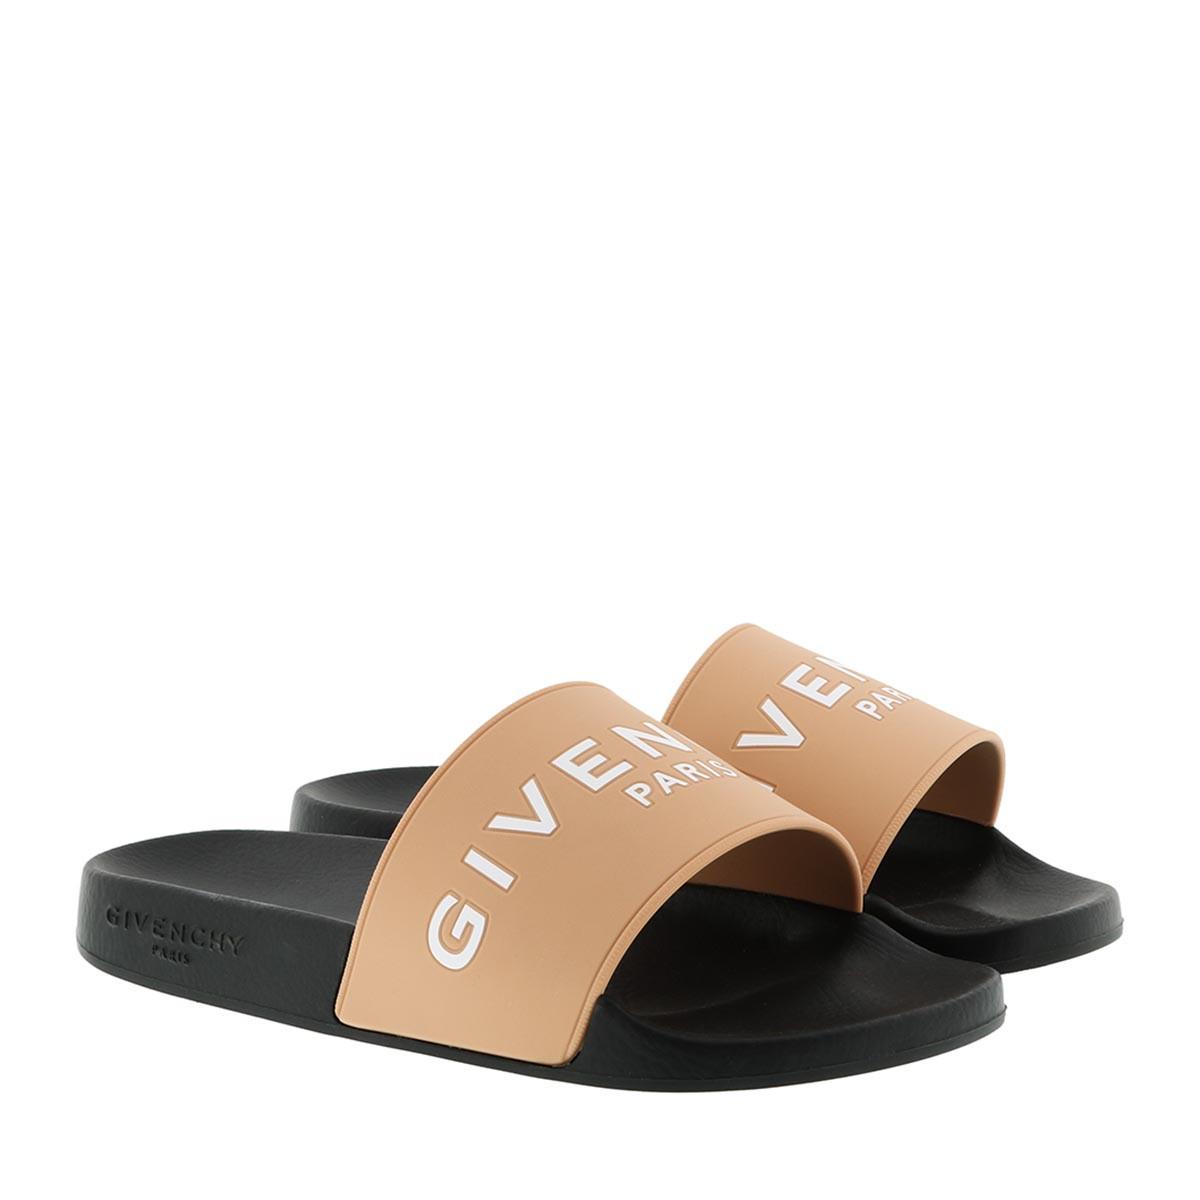 nude givenchy sliders